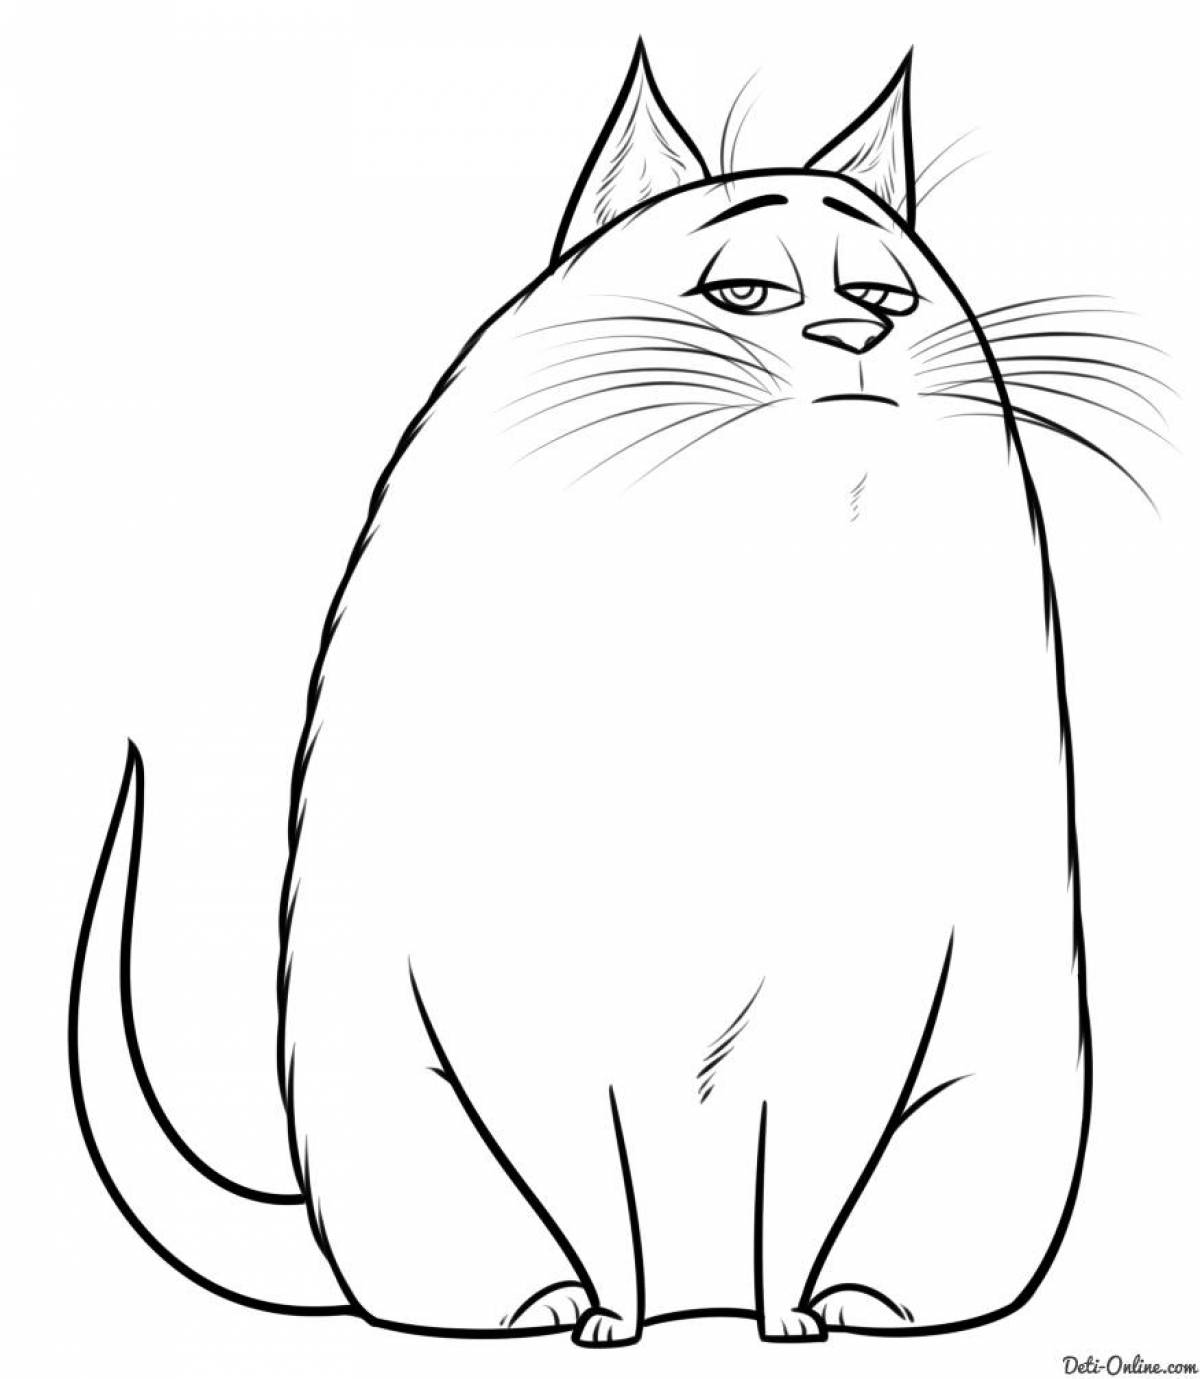 Coloring page hypnotic cat